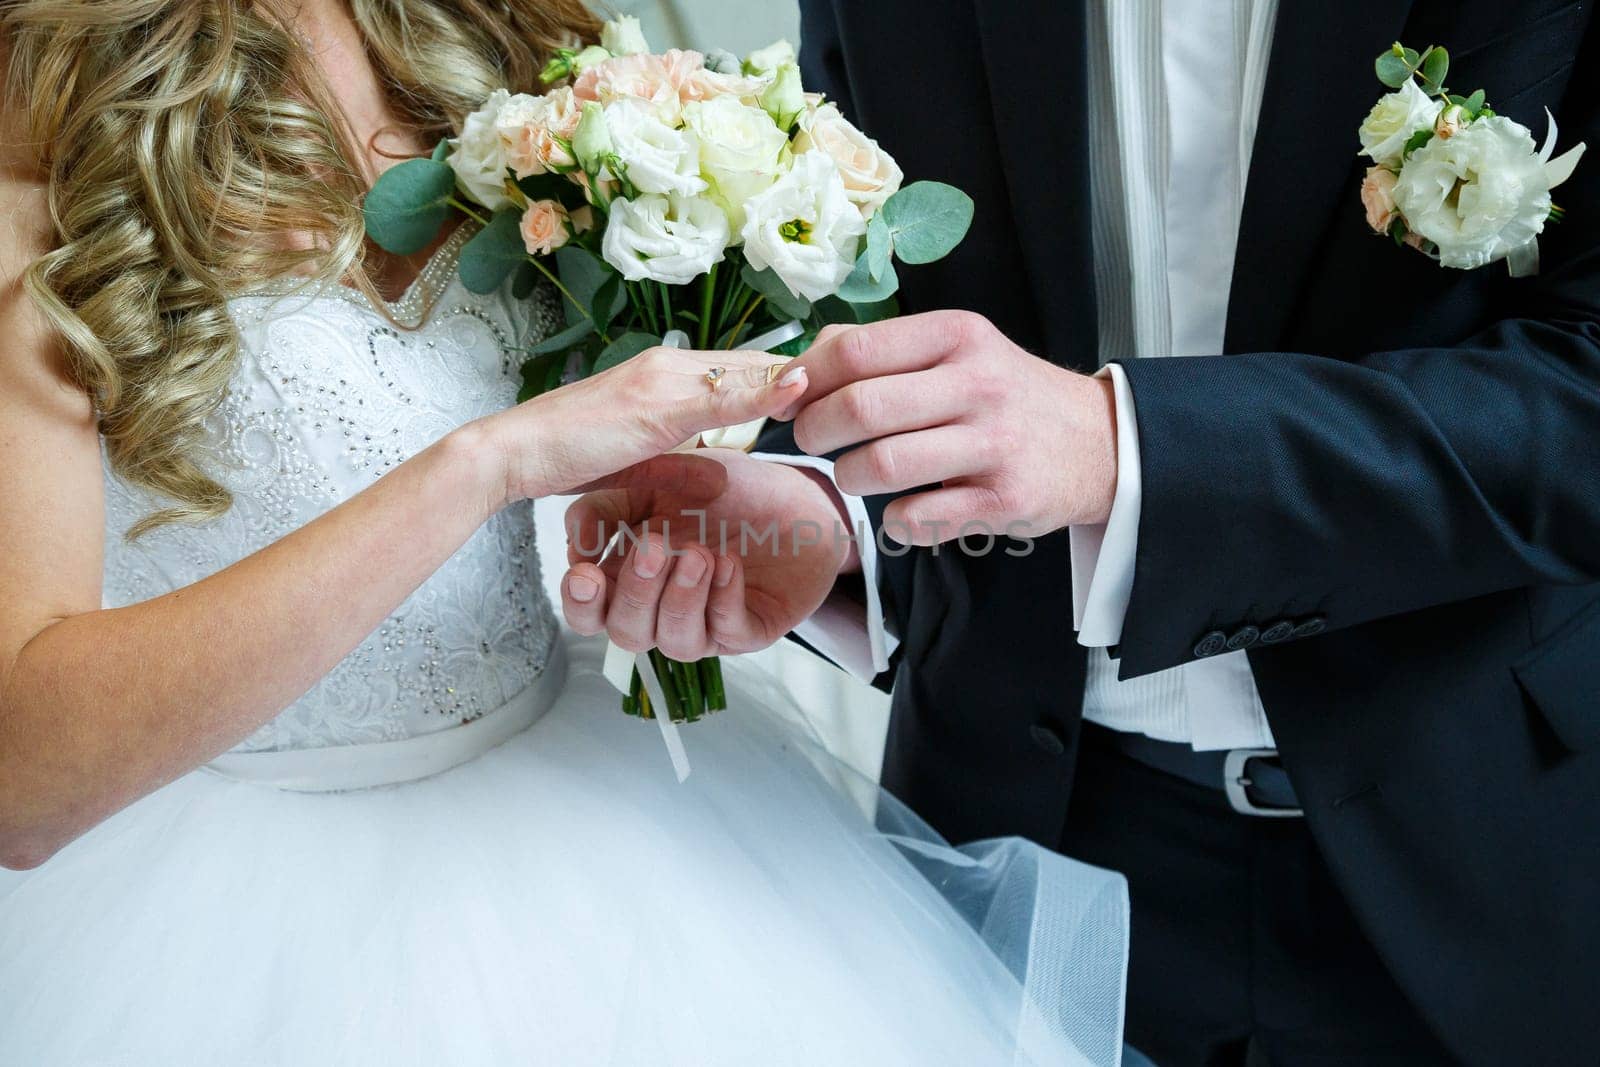 gold wedding rings in hands of newlyweds on wedding day